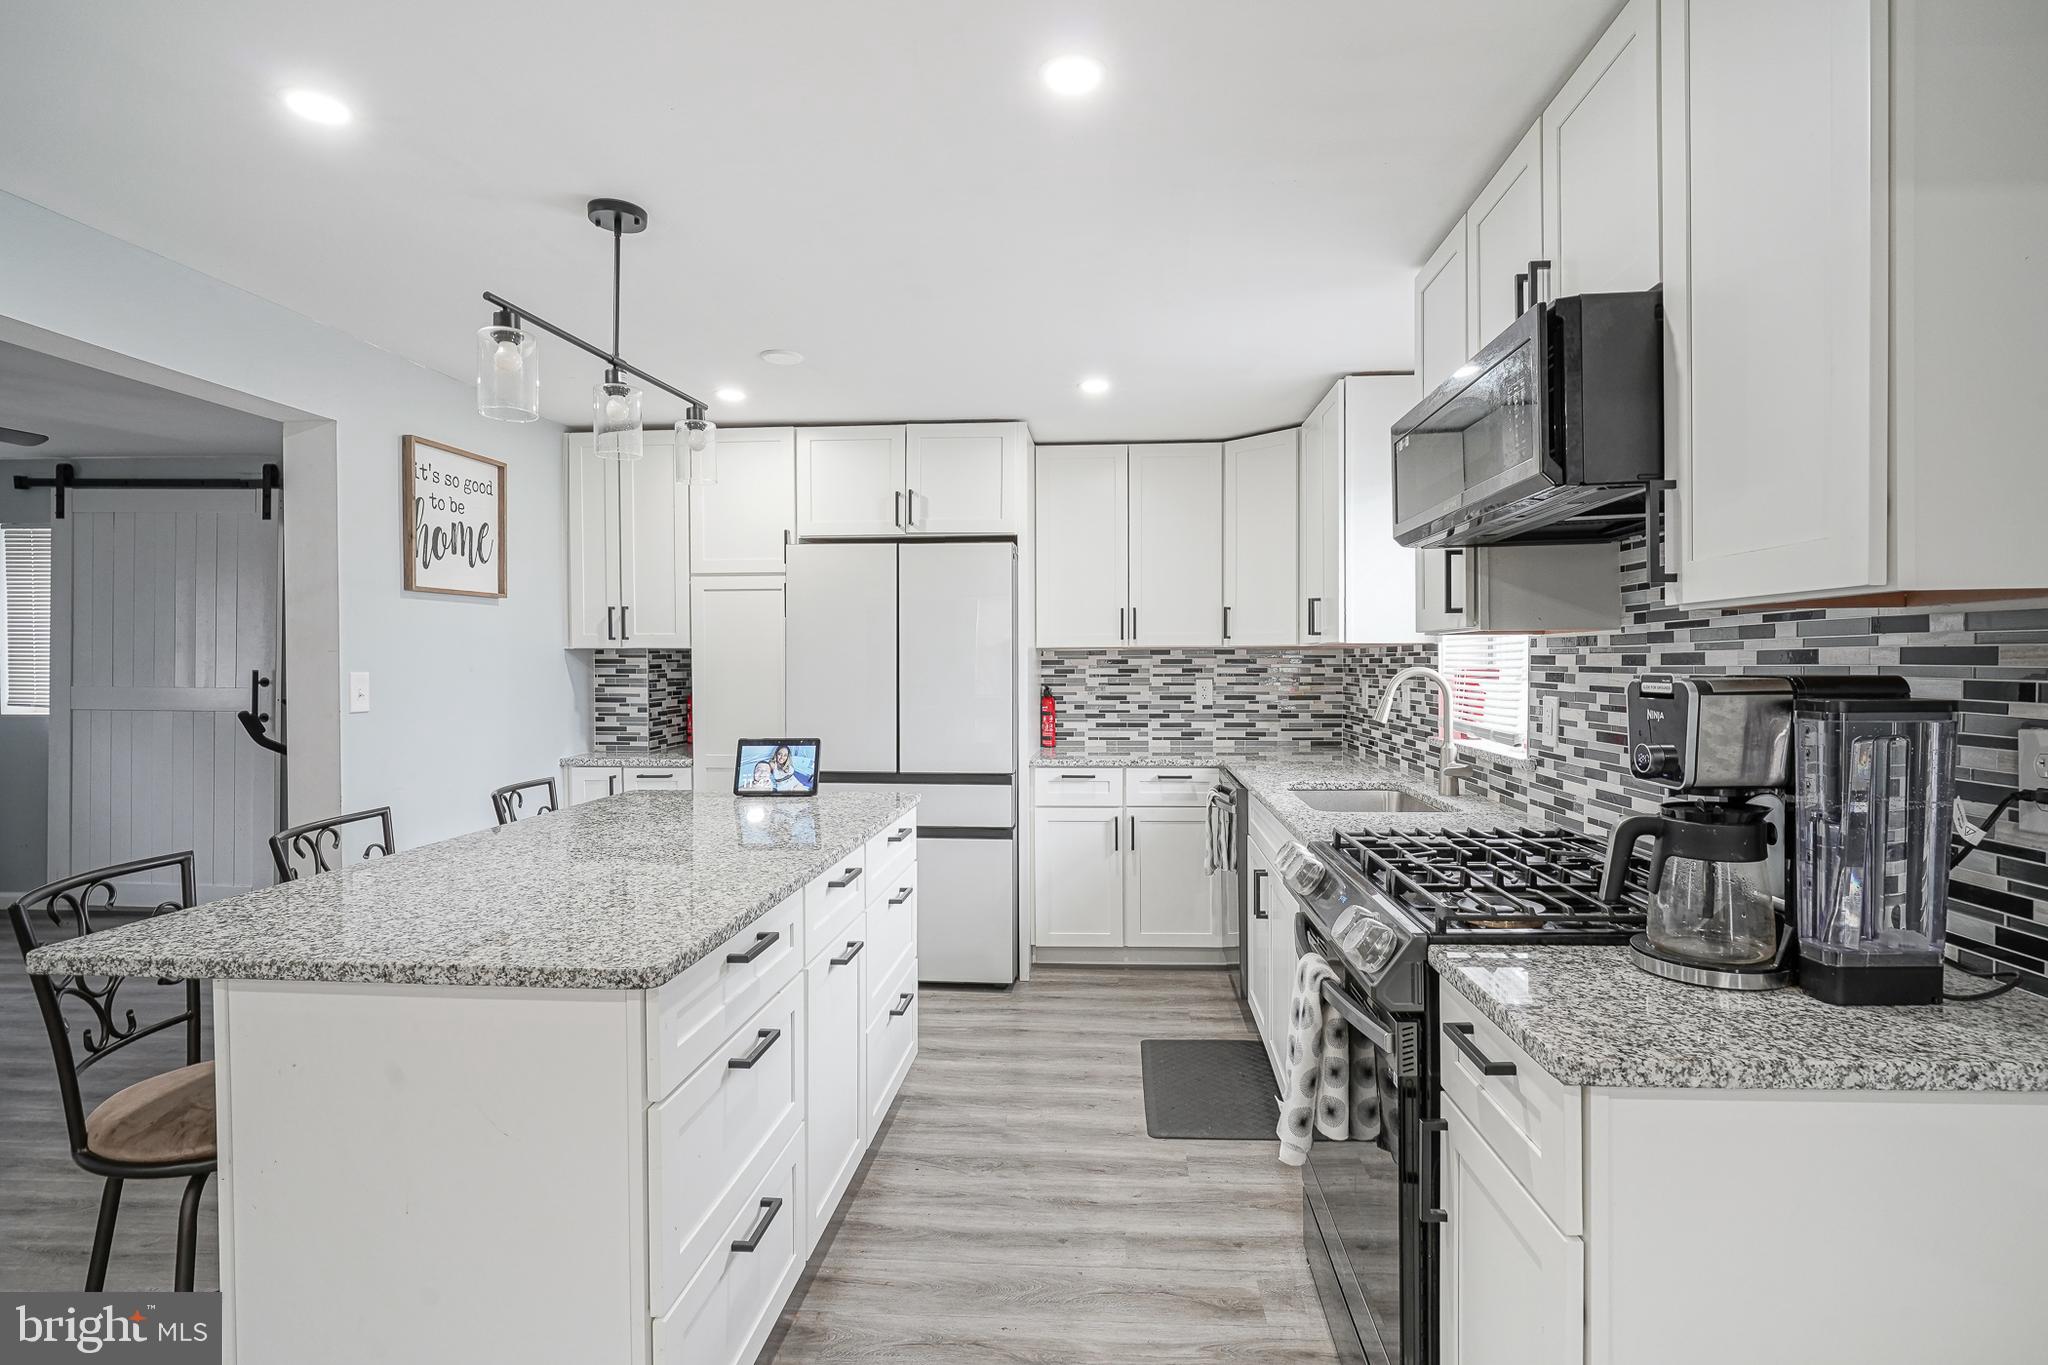 a kitchen with white cabinets sink and stainless steel appliances